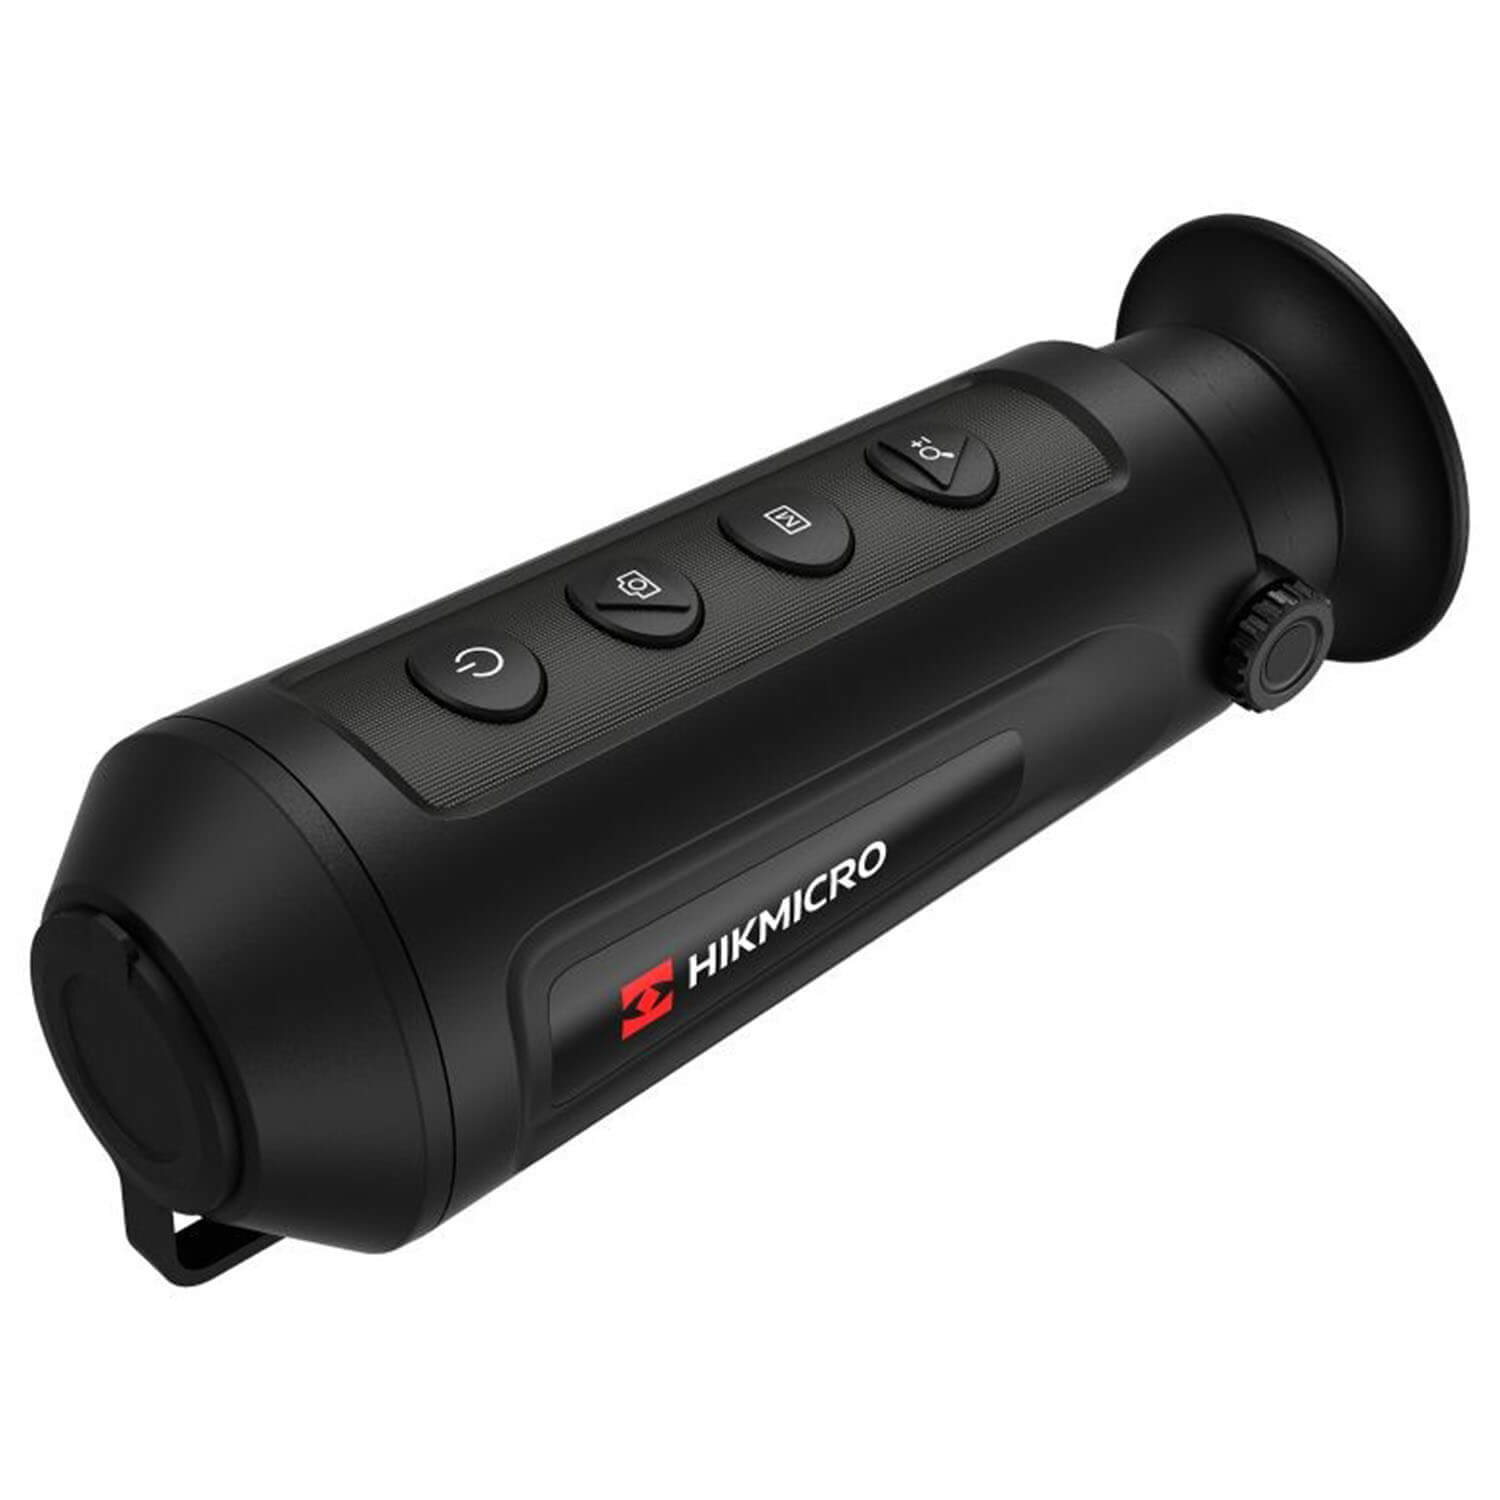 Hikmicro thermal device lynx LE10S - Night Vision Devices